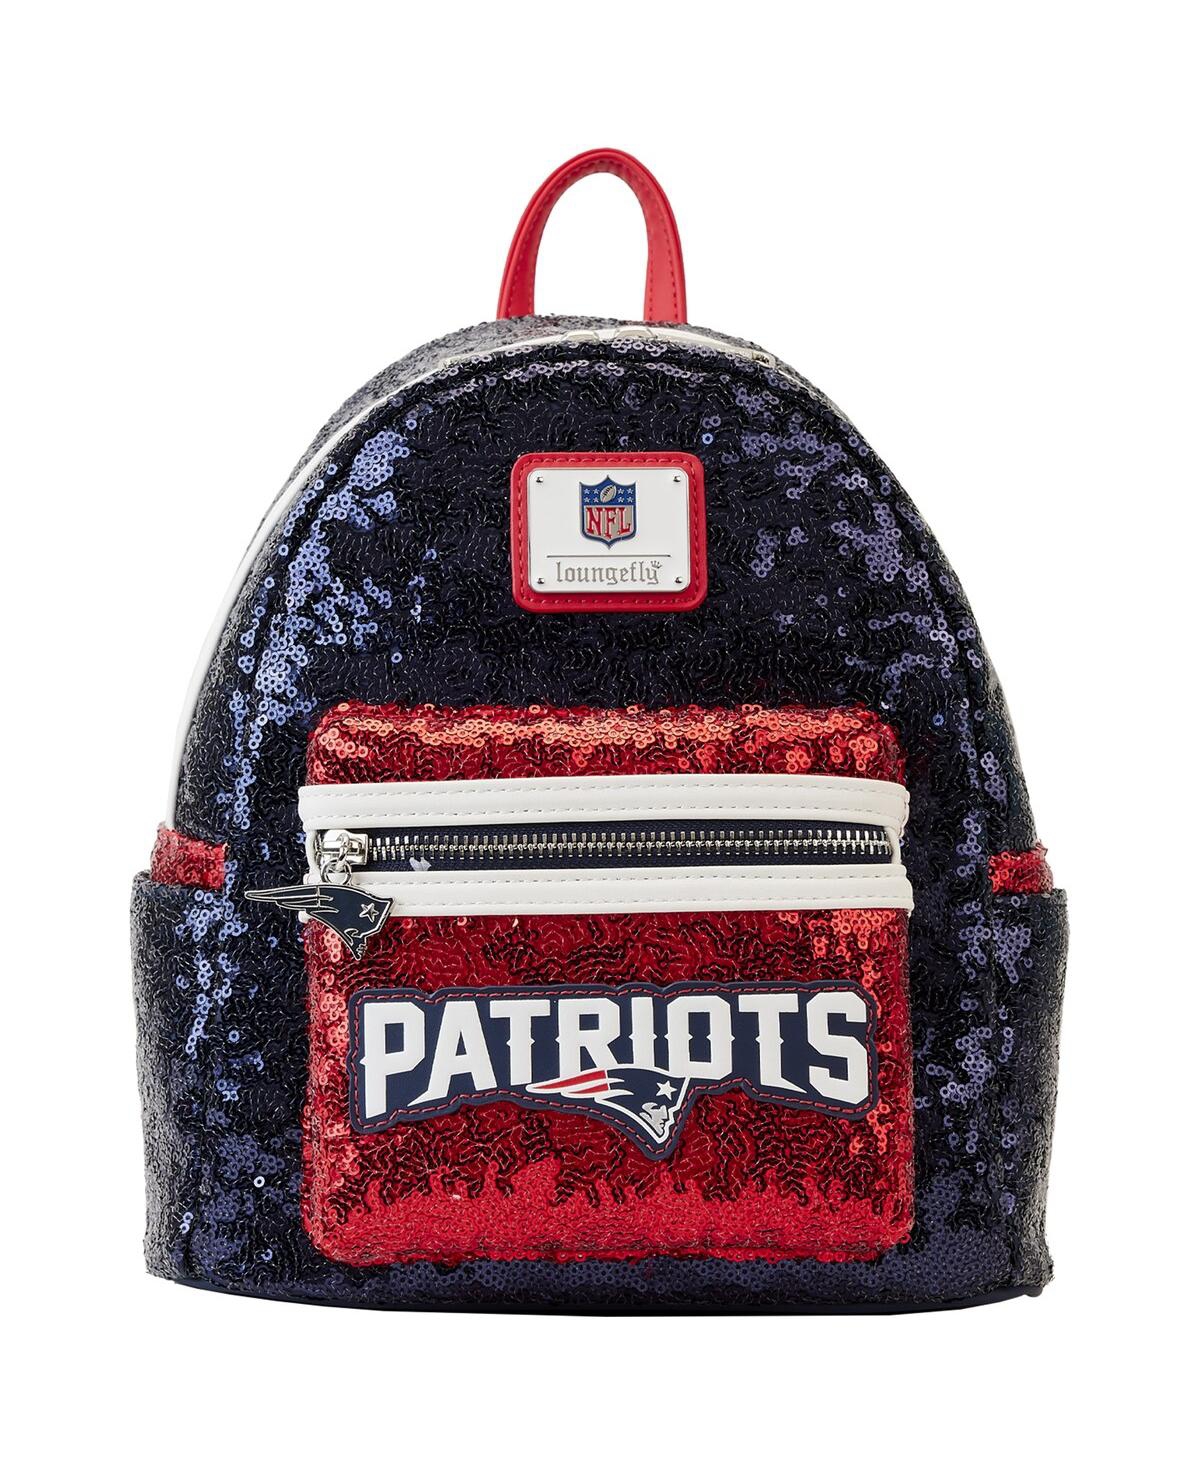 Men's and Women's Loungefly New England Patriots Sequin Mini Backpack - Navy